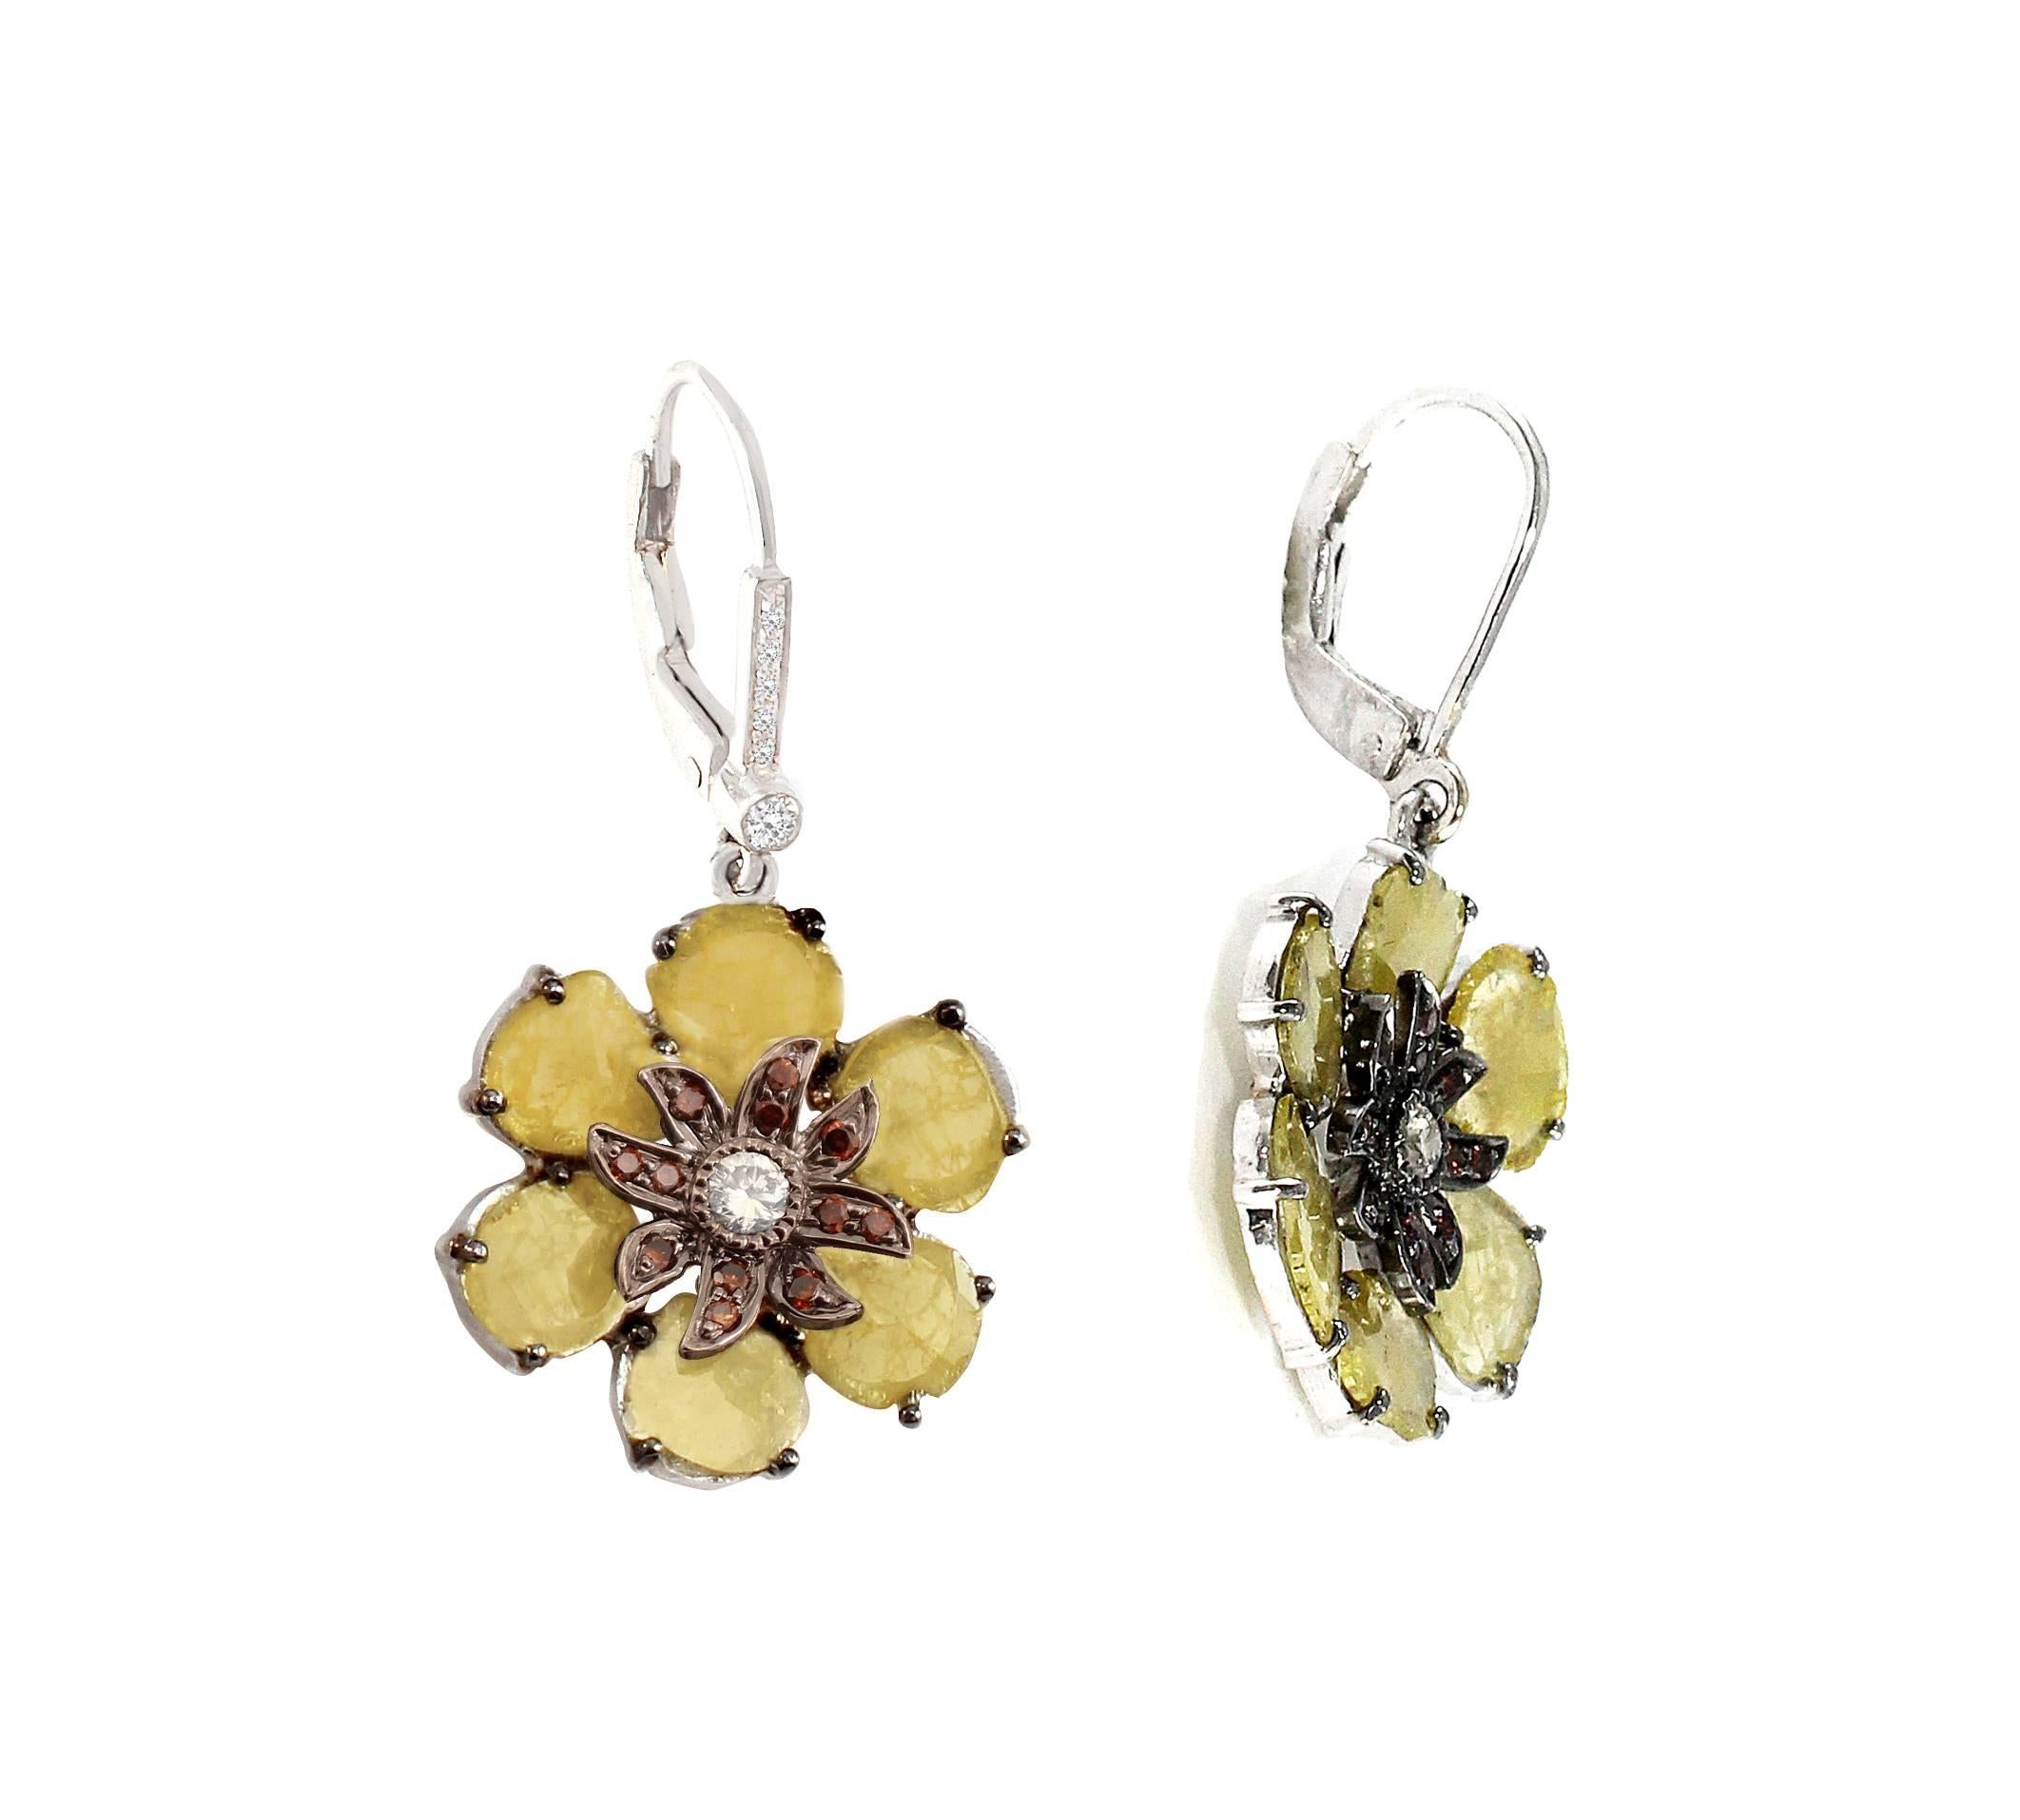 Yellow Slice Diamond Floral Earrings accented with Natural Burnt Orange and White Diamonds with 3.41cts. total diamond weight set in 18k gold